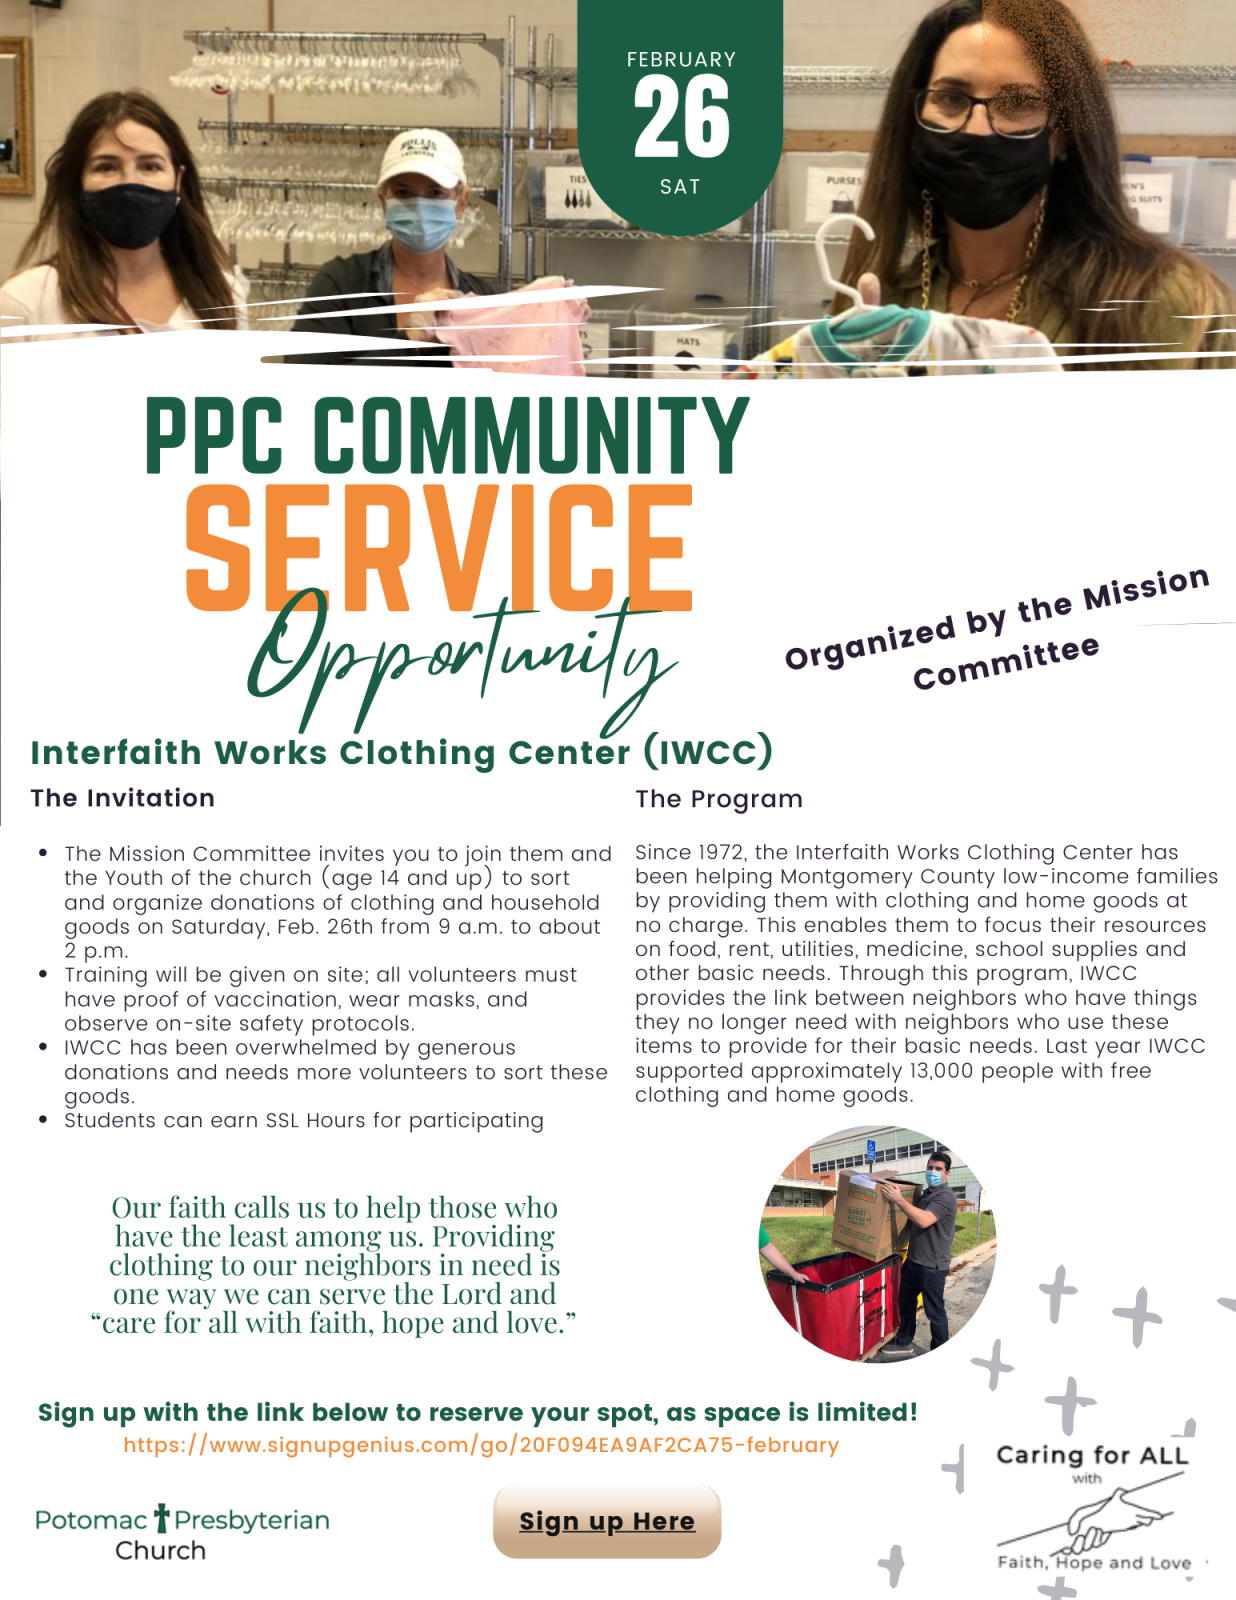 Copy of Interfaith Works Clothing Center (IWCC)